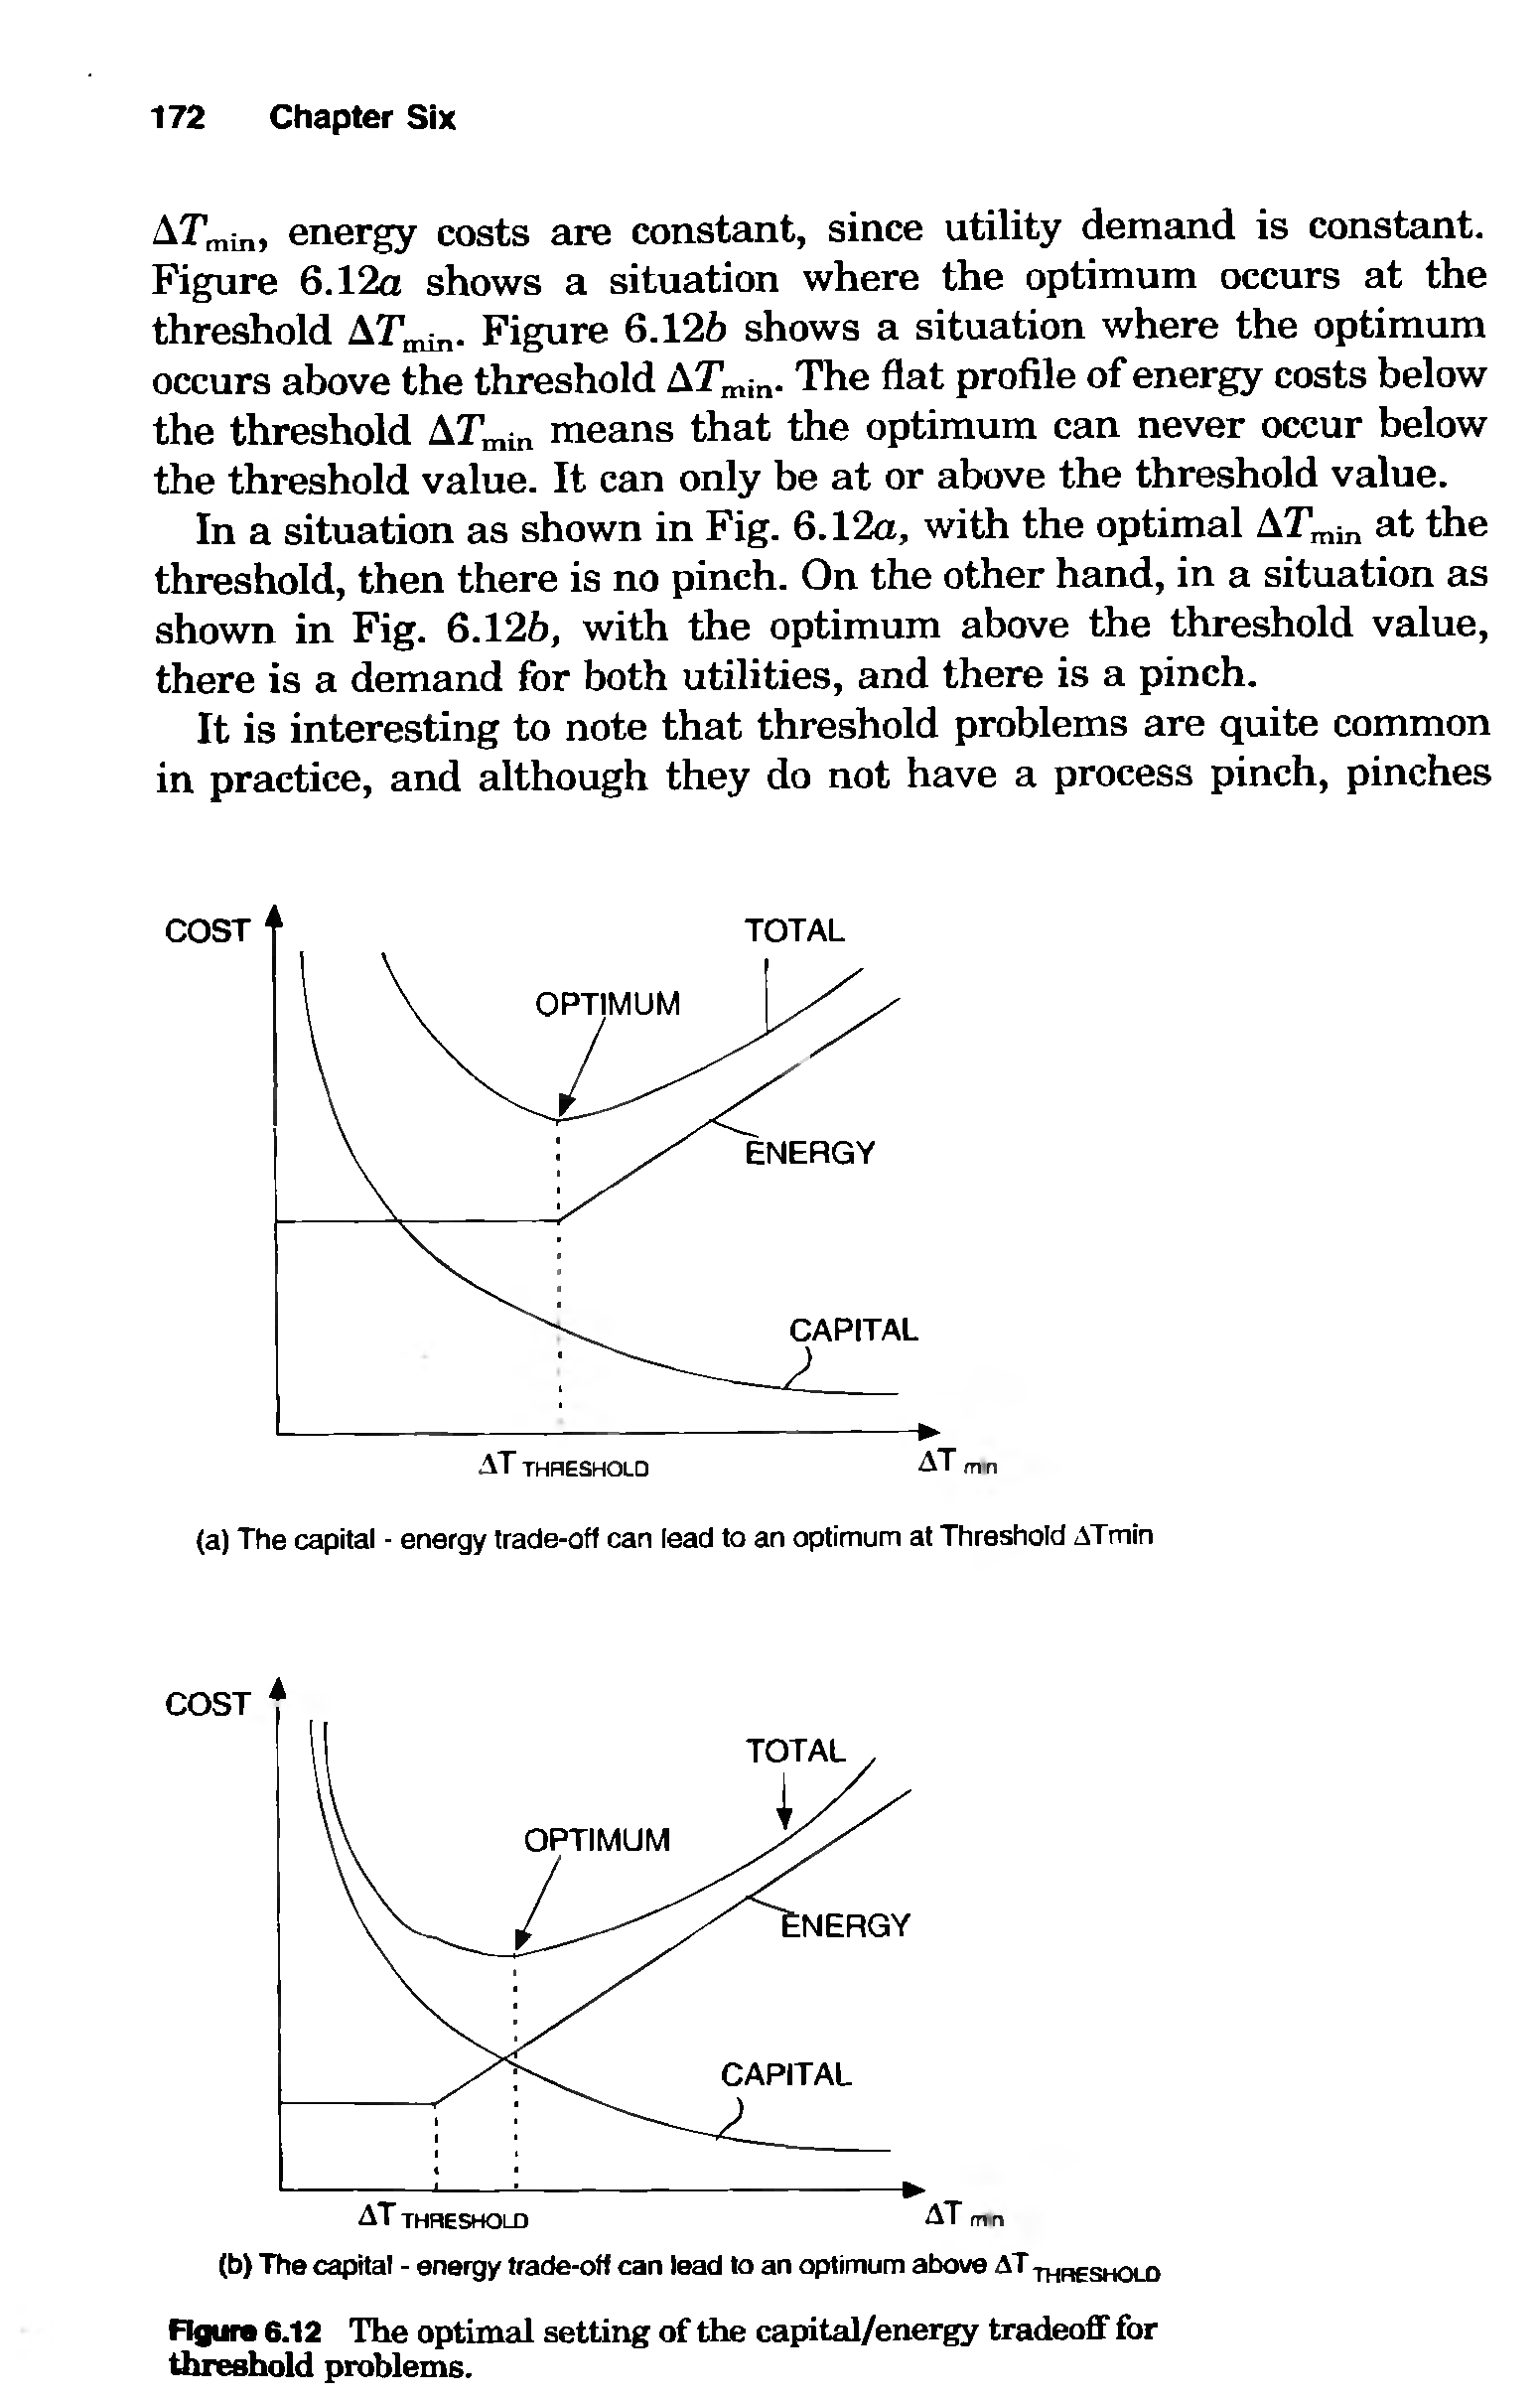 Figure 6.12 The optimal setting of the capital/energy tradeoff for threshold problems.